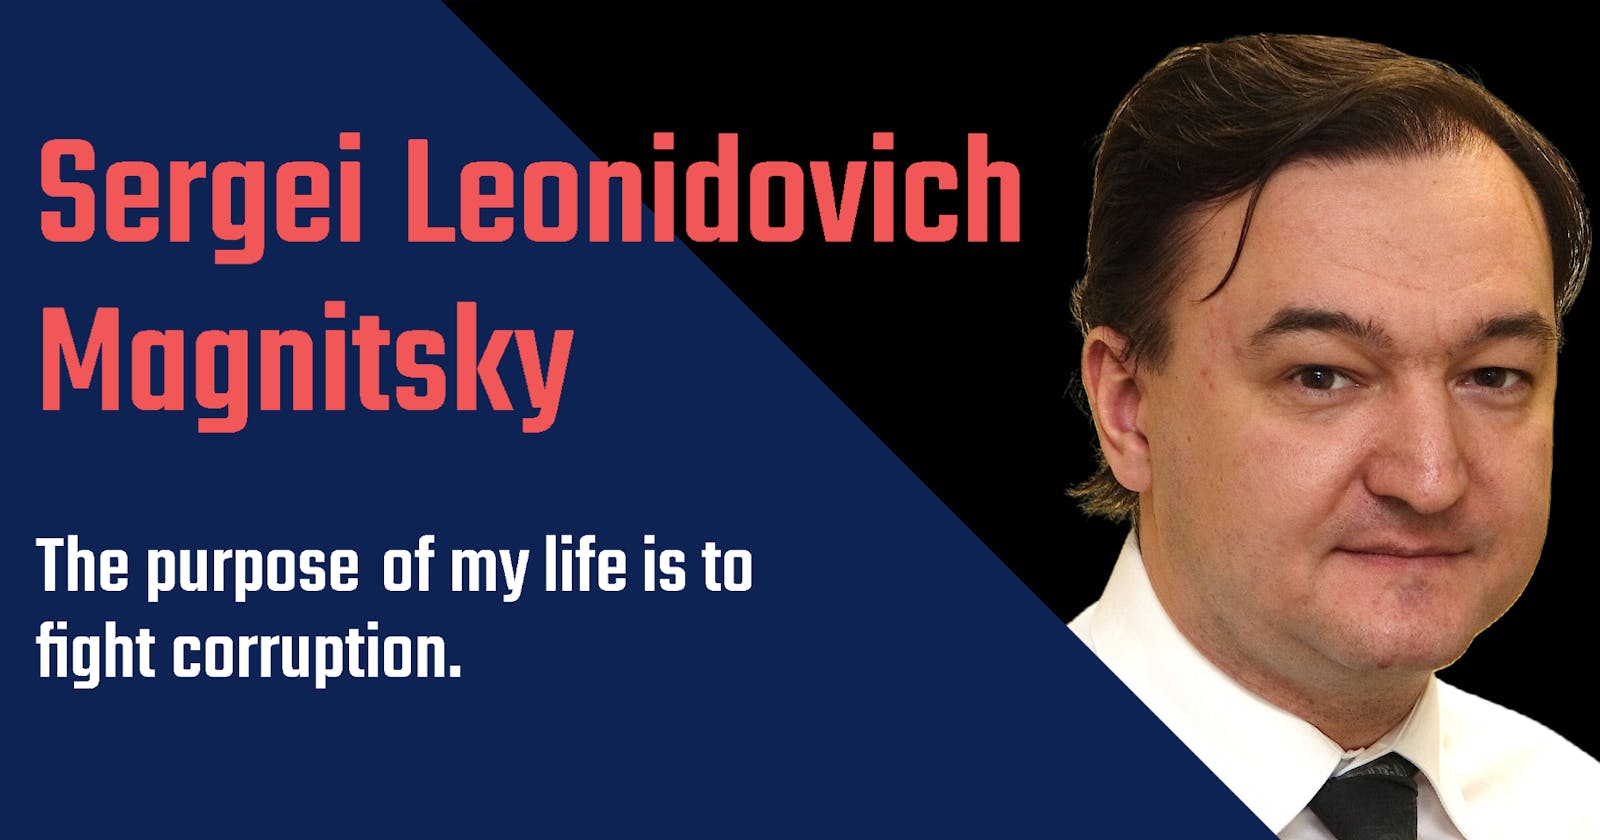 Sergei Leonidovich Magnitsky: The Brave Lawyer Who Fought Against Corruption